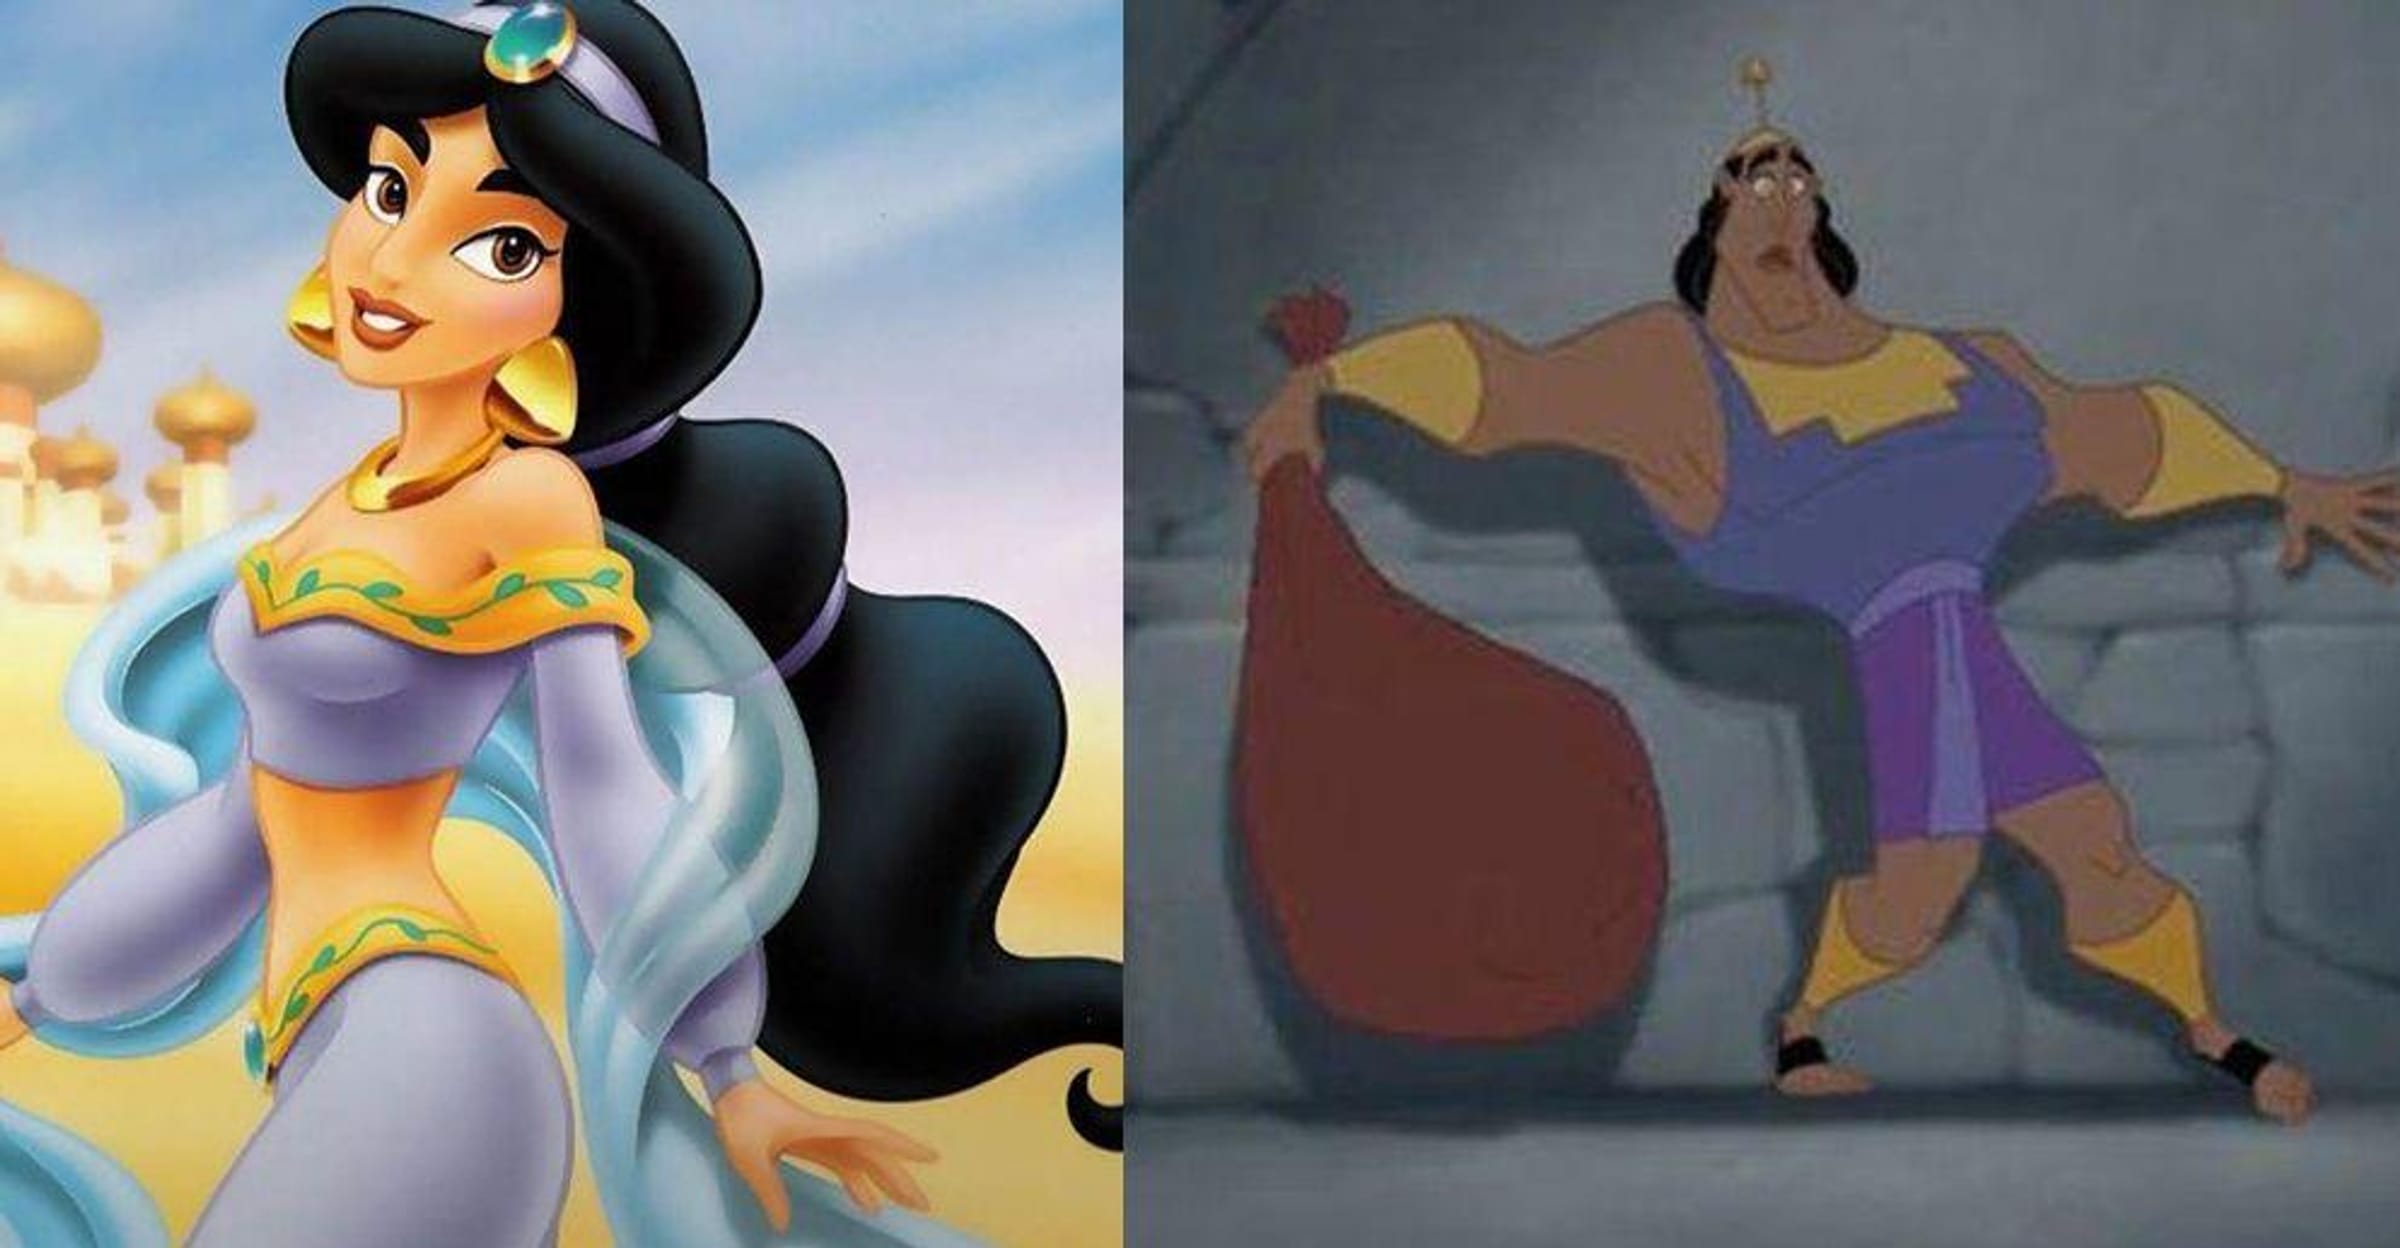 The Best Fat Cartoon Characters In TV History, Ranked